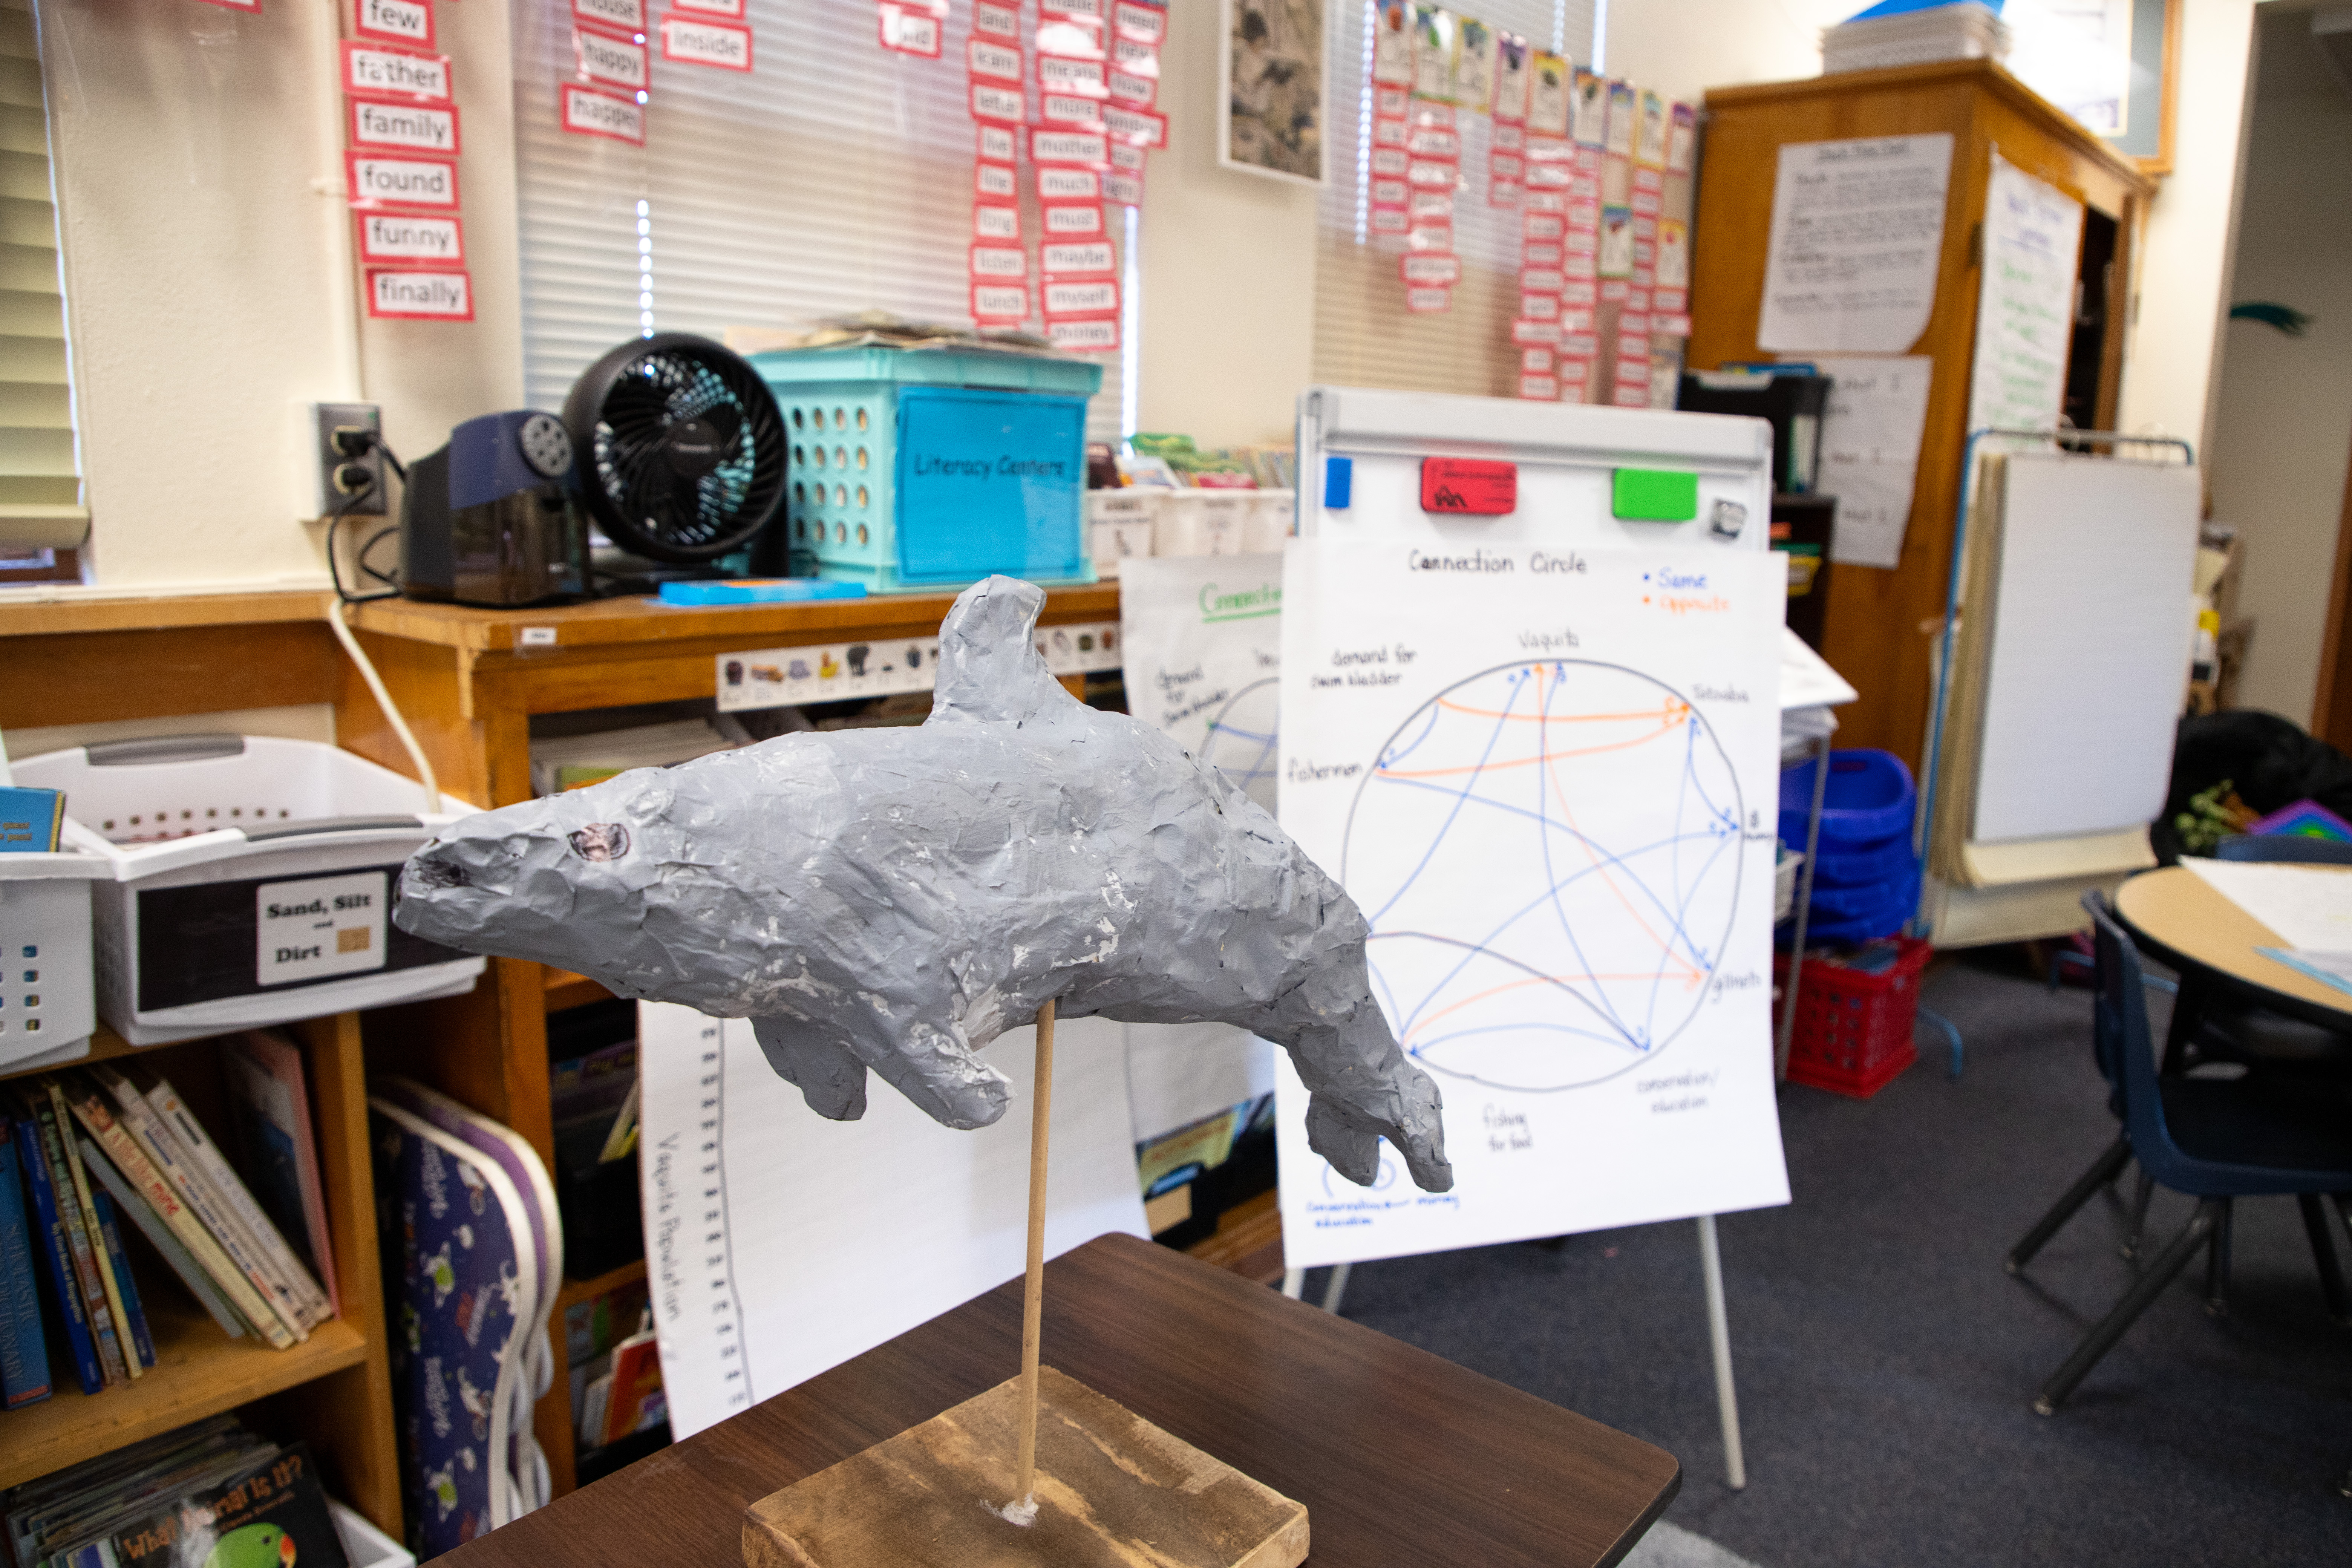 A papier mache vaquita is on display next to notes about the animal